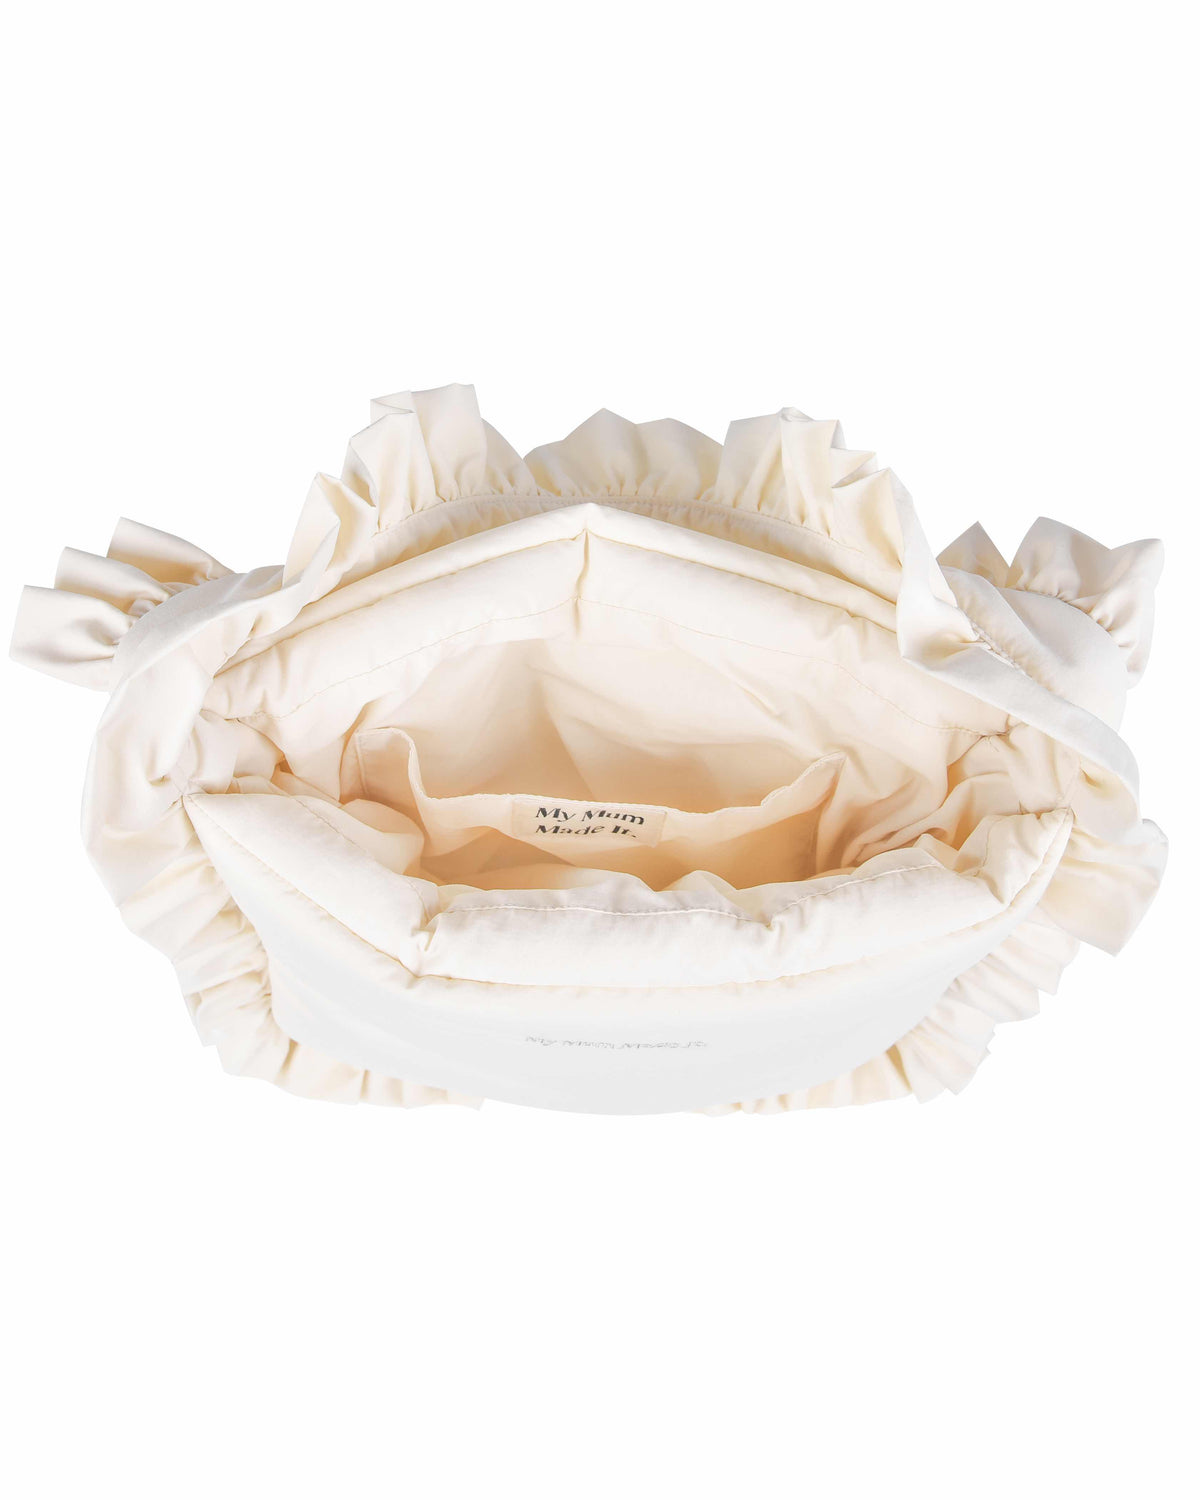 Large Pillow Tote - Cream Frill